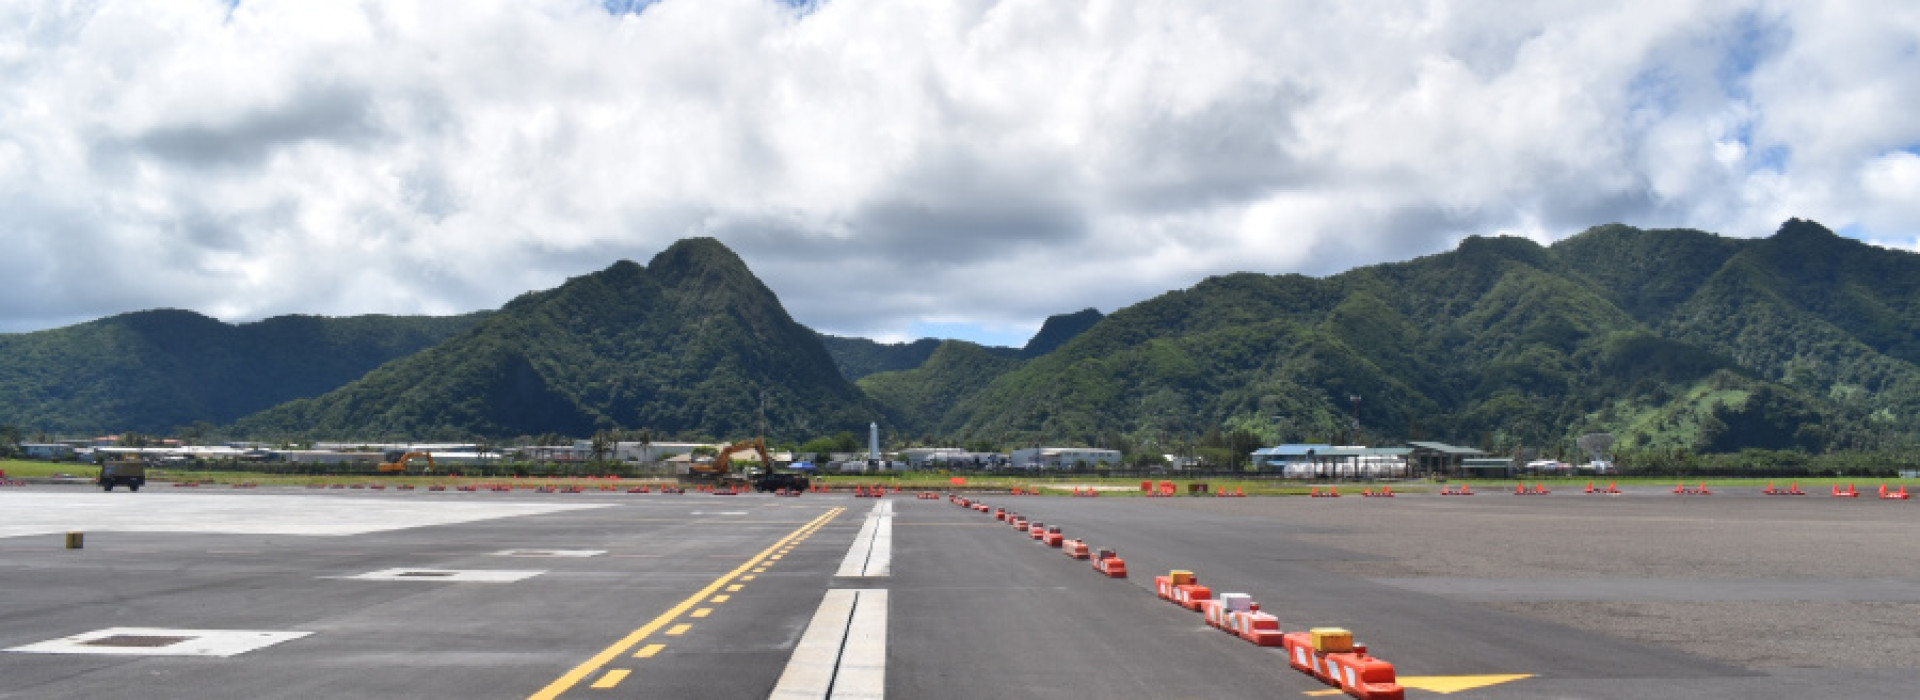 Works Complete on the Pago Pago Airport Apron Rehabilitation project